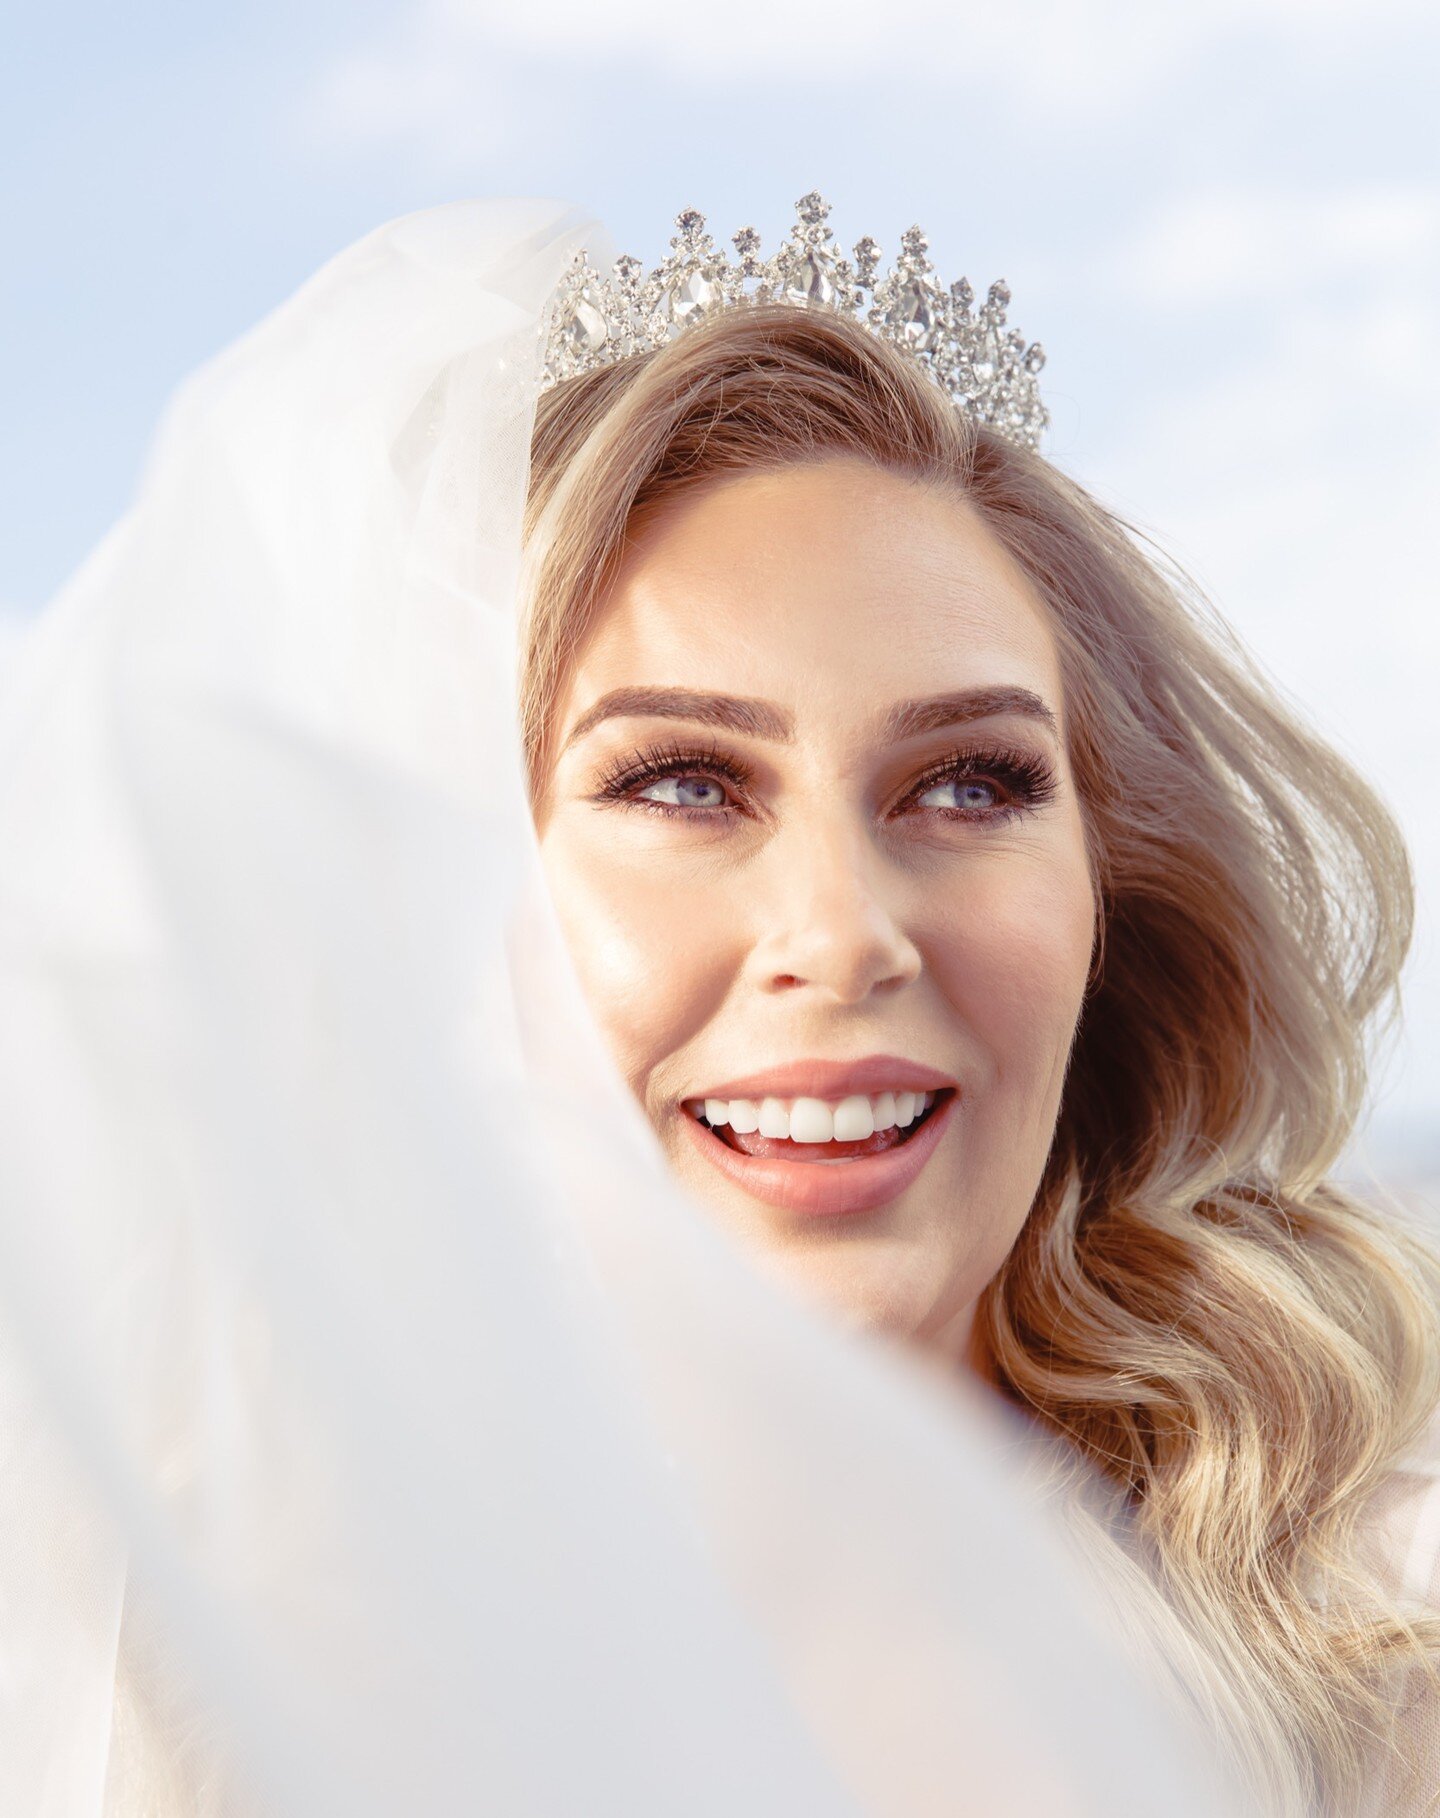 Make-up and hair make an incredible difference on your wedding day. If
you choose the right makeup artist, they will relax you and make you feel
calm and relaxed. You want to look your very best and feel your very
best inside as well, making the most